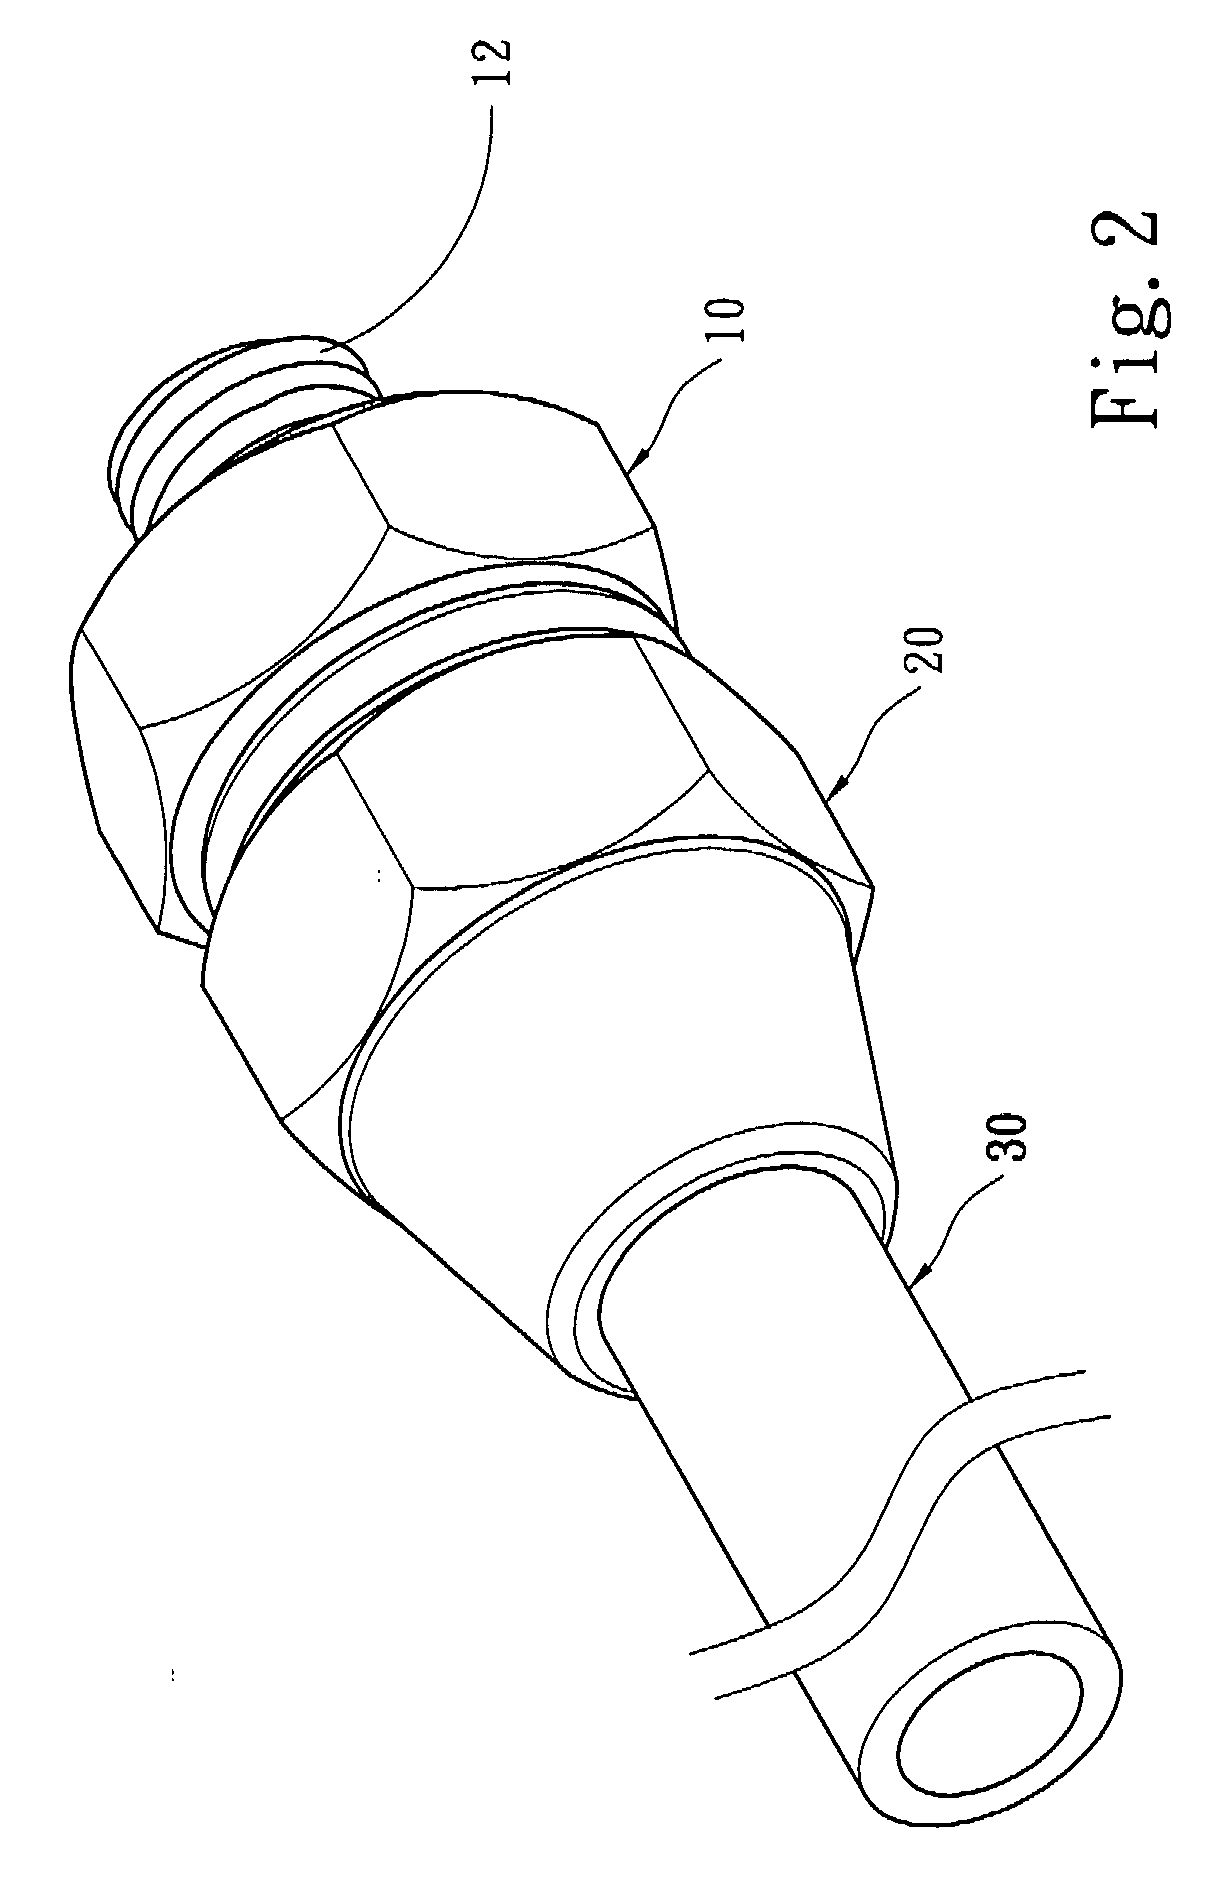 Conductive pipe and pipe connector assembly thereof